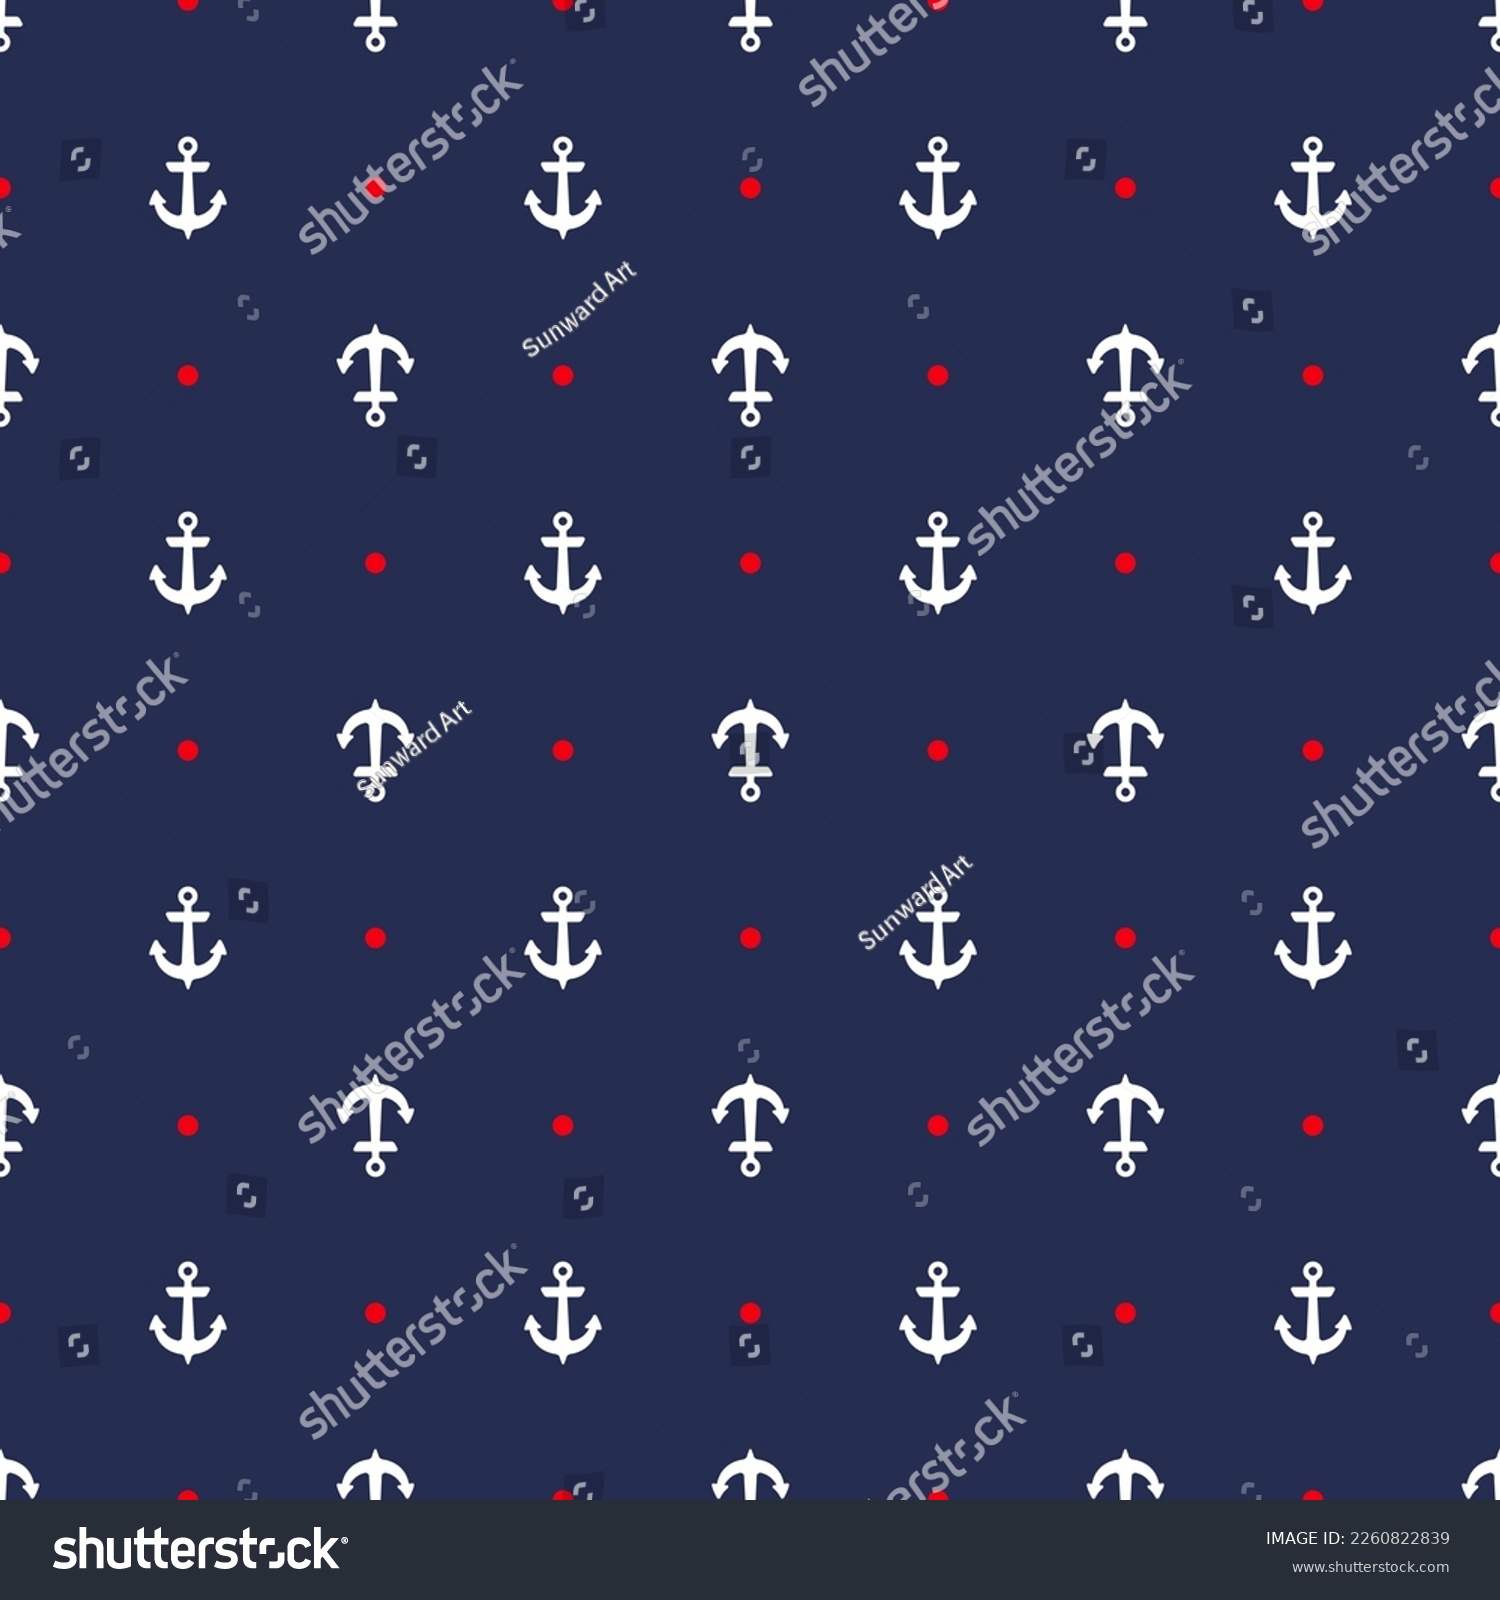 SVG of White ship anchors and red dots marine vector seamless pattern. Clothes print. Navy vessel equipment ornament. Boat anchor endless pattern, sailor style shirt fabric print. svg